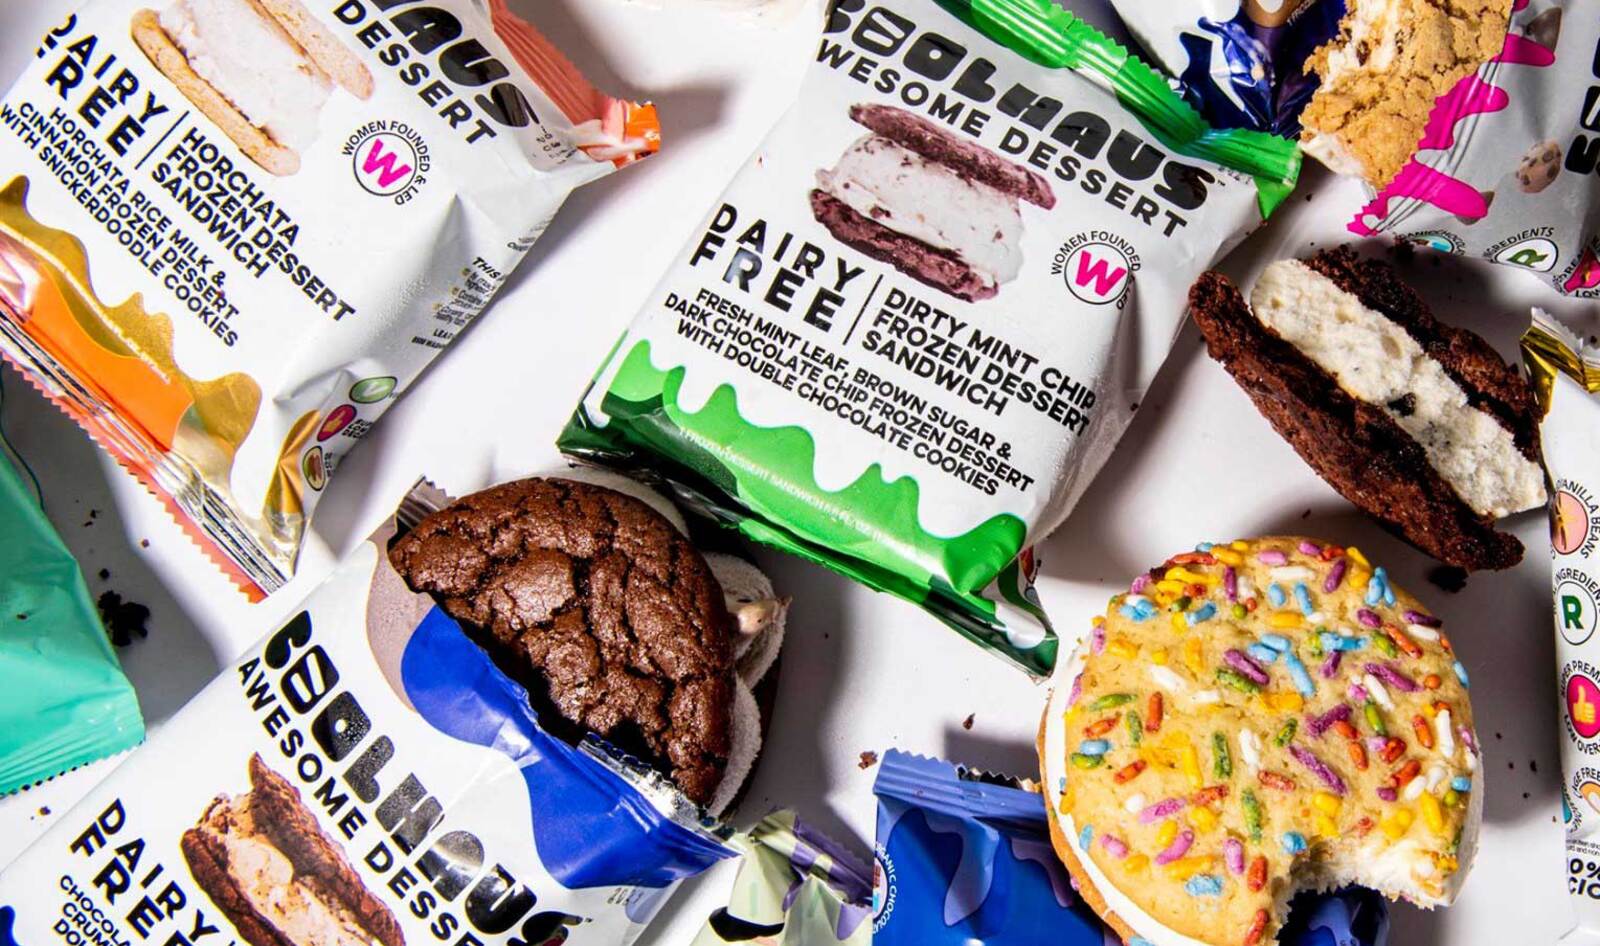 6 Incredible Vegan Ice Cream Sandwiches You Can Find at the Store